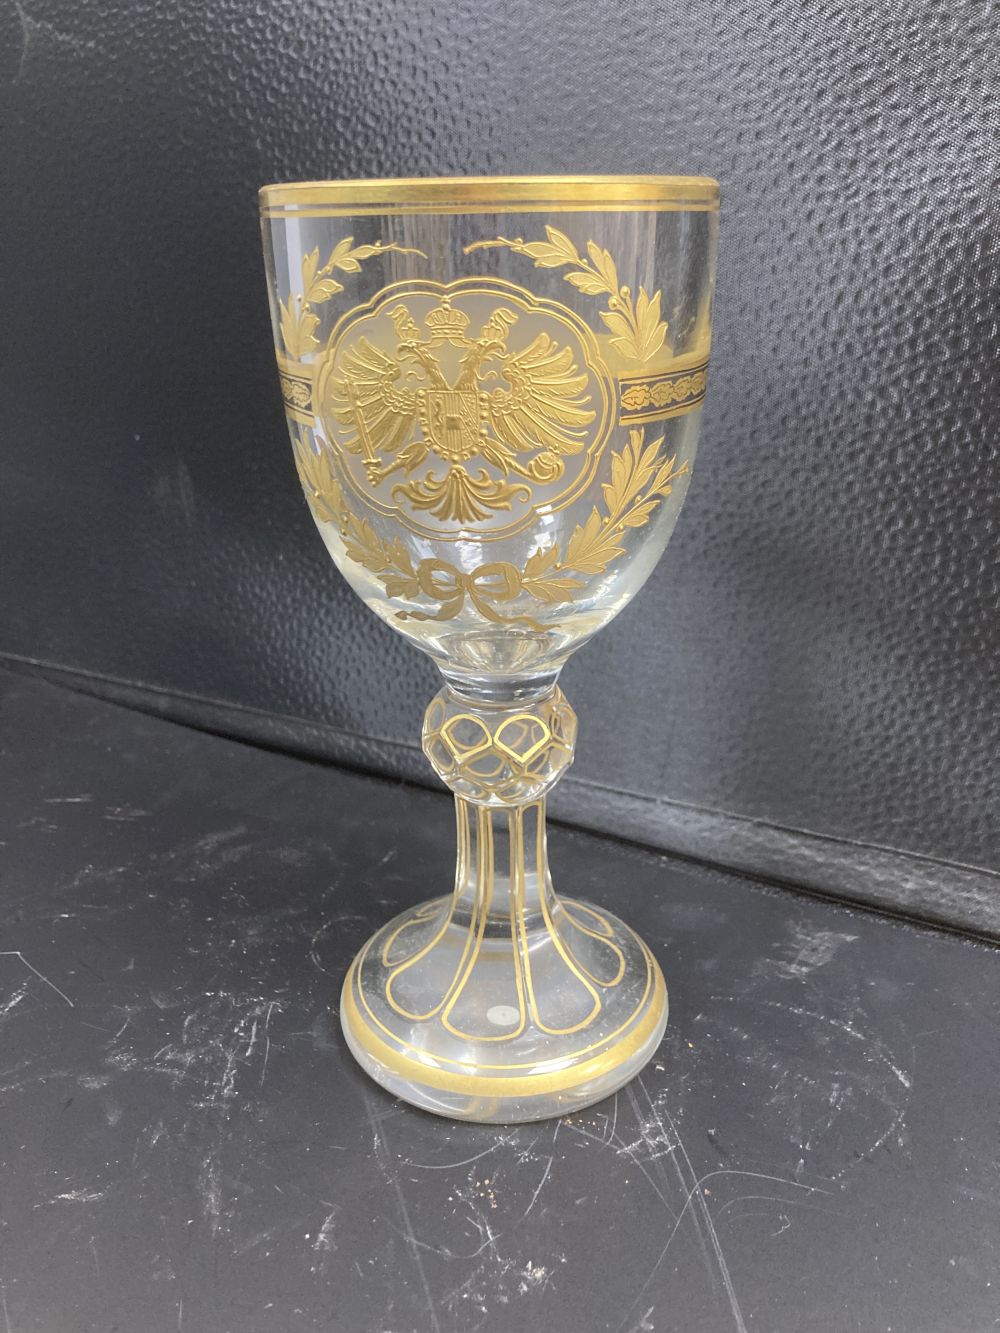 A Bohemian gilded glass goblet, c.1900, decorated with an Austrian Imperial Eagle, 18.5cm